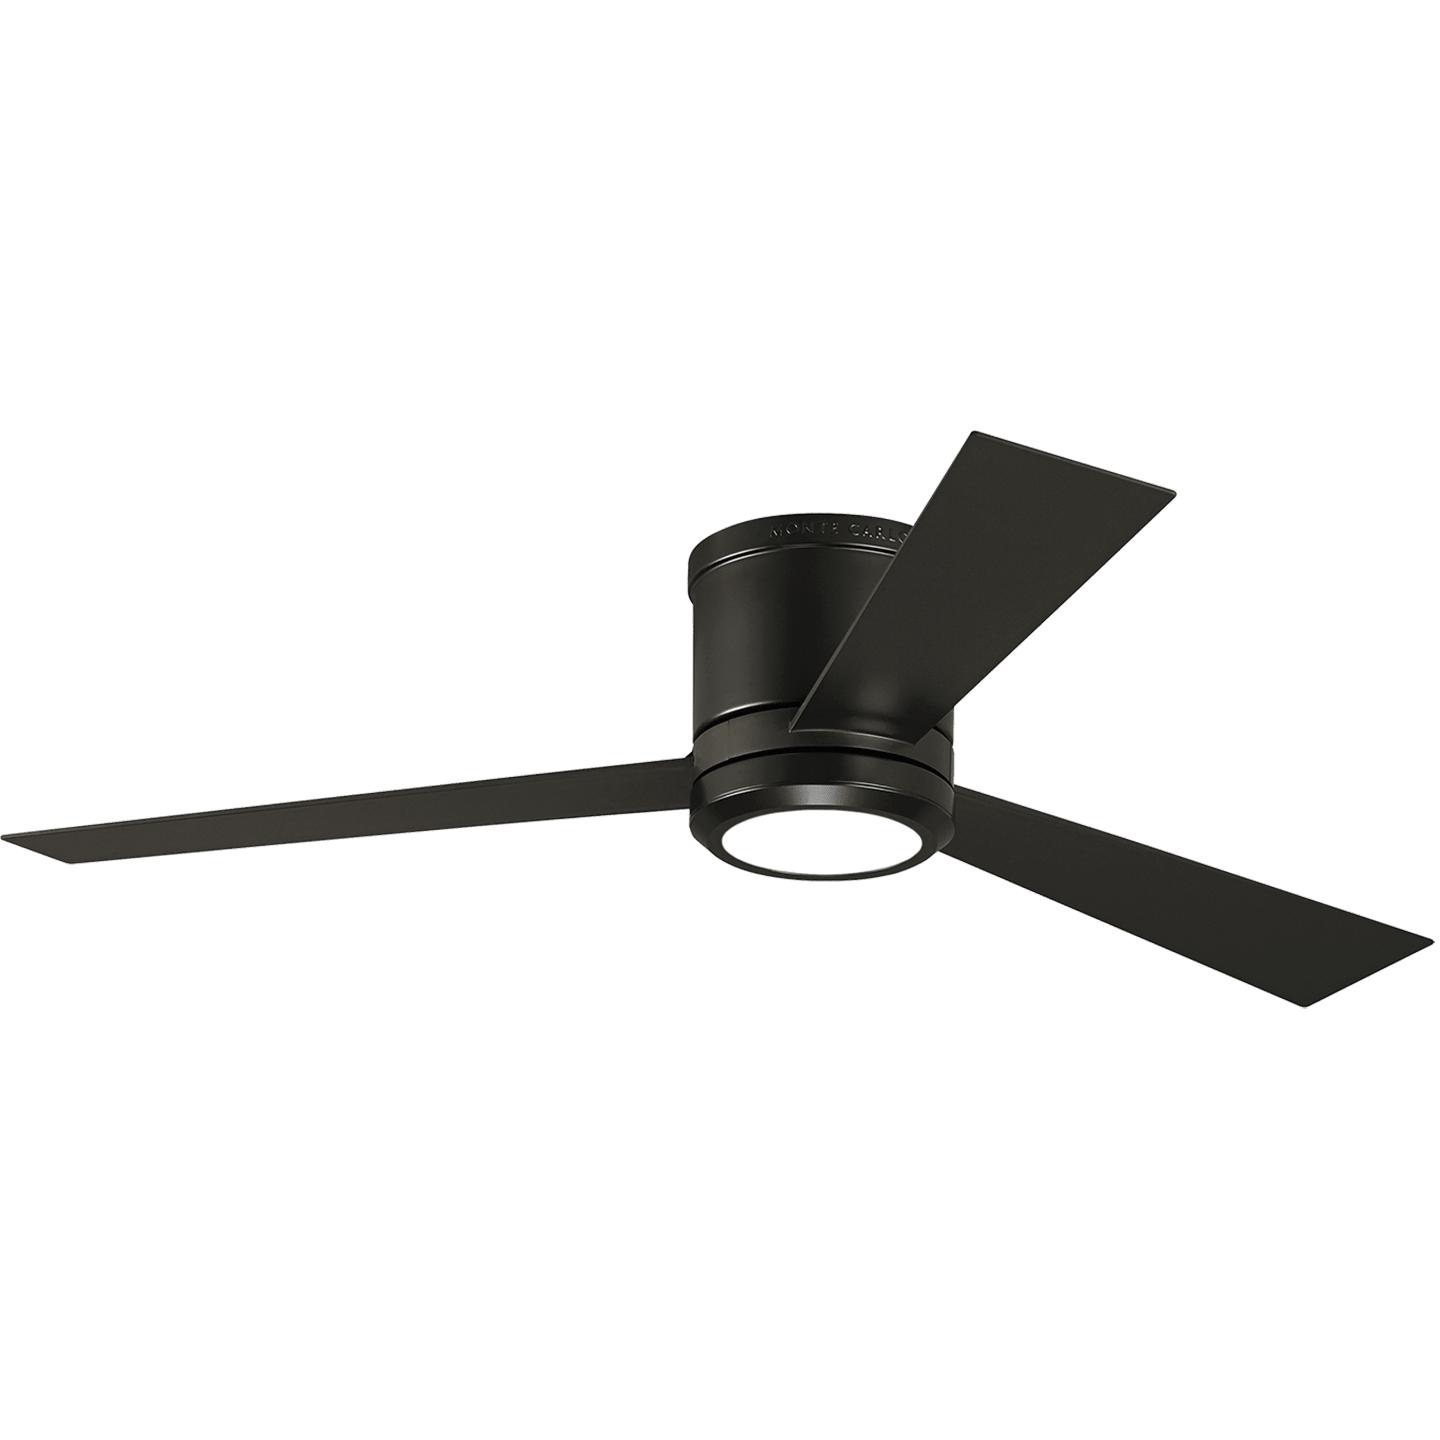 Oil Rubbed Bronze Housing With Roman Bronze Blades with Light Kit